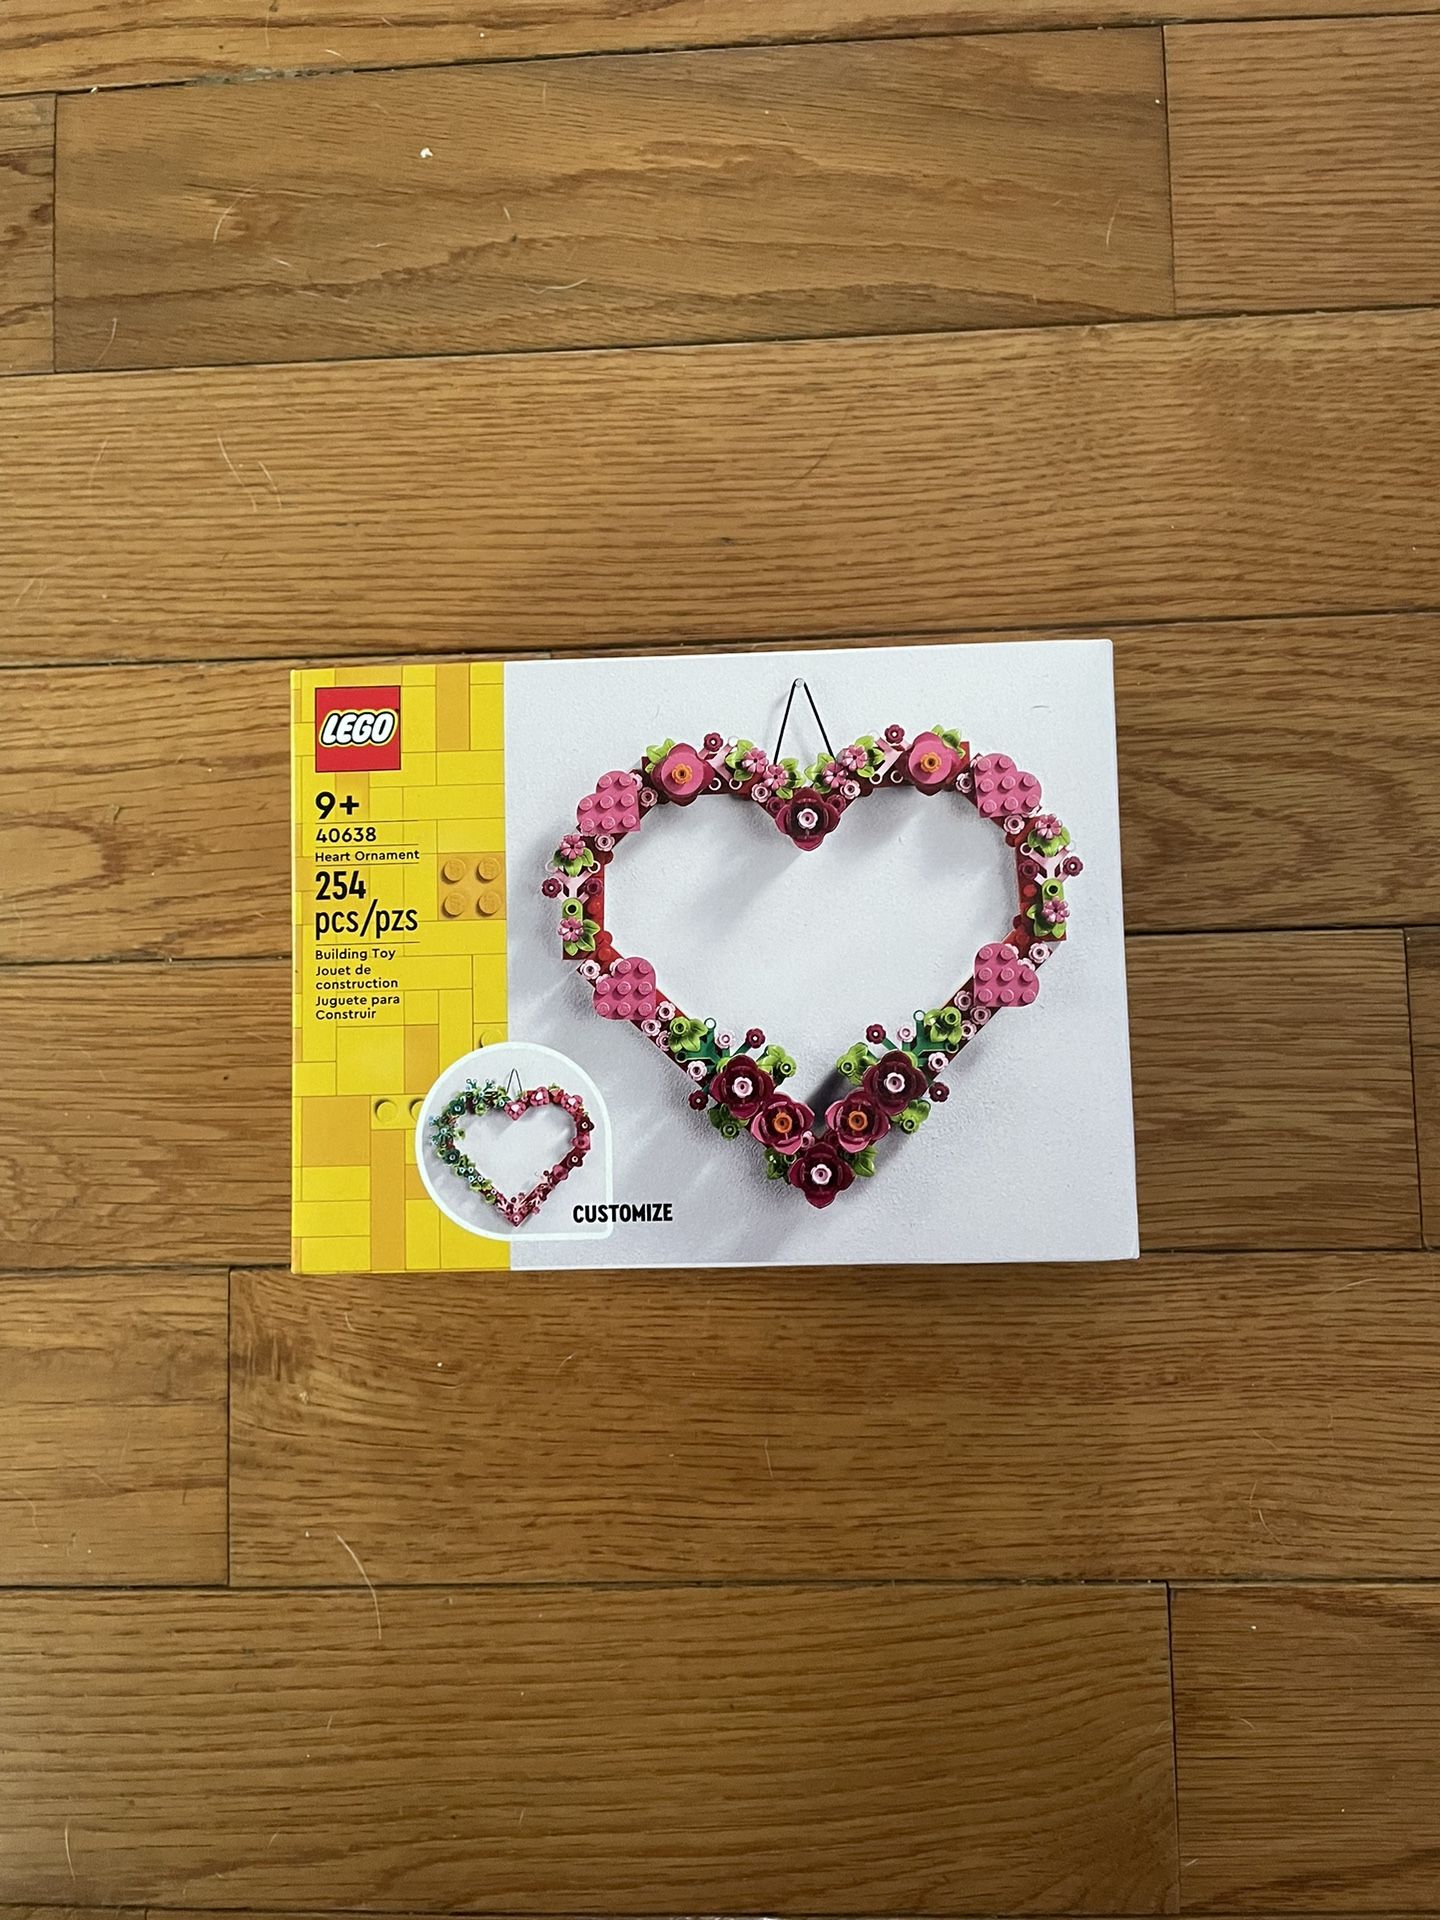 Lego 40638 Heart Ornament for Sale in Inglewood, CA - OfferUp